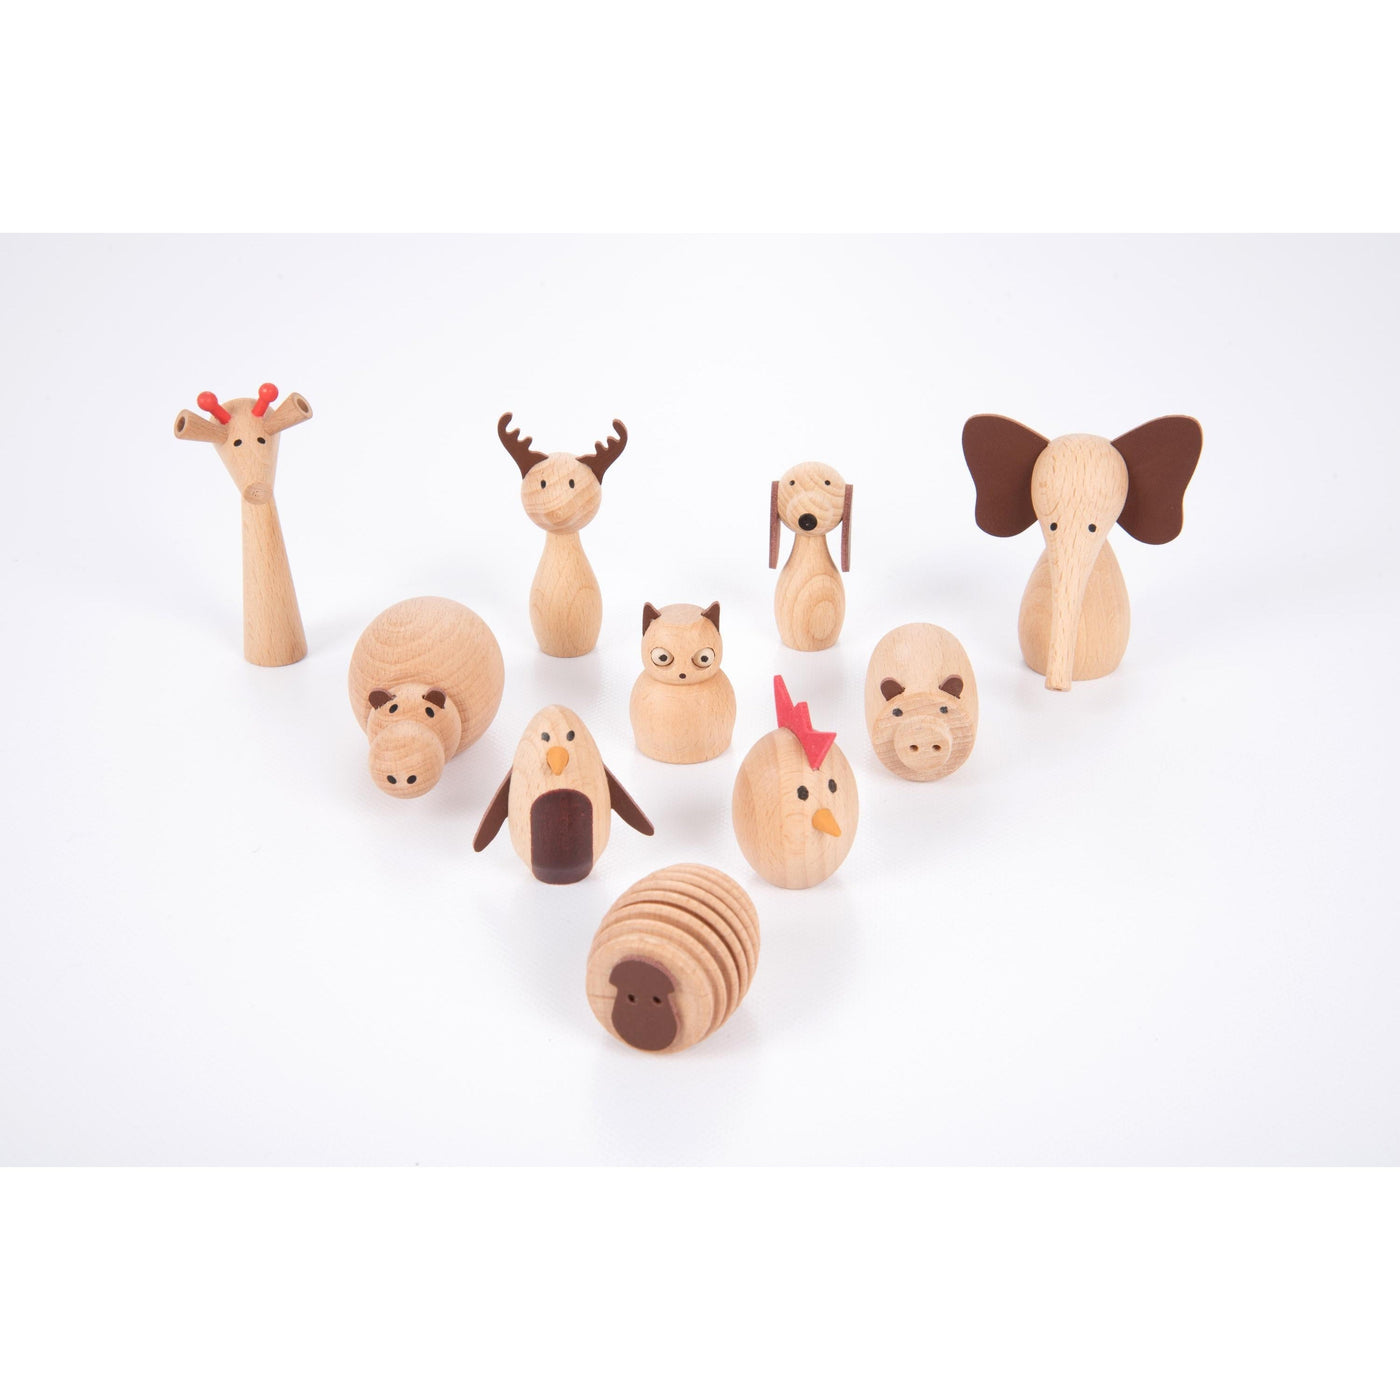 TickIT Wooden Animal Friends - Perfect for Imaginative Play